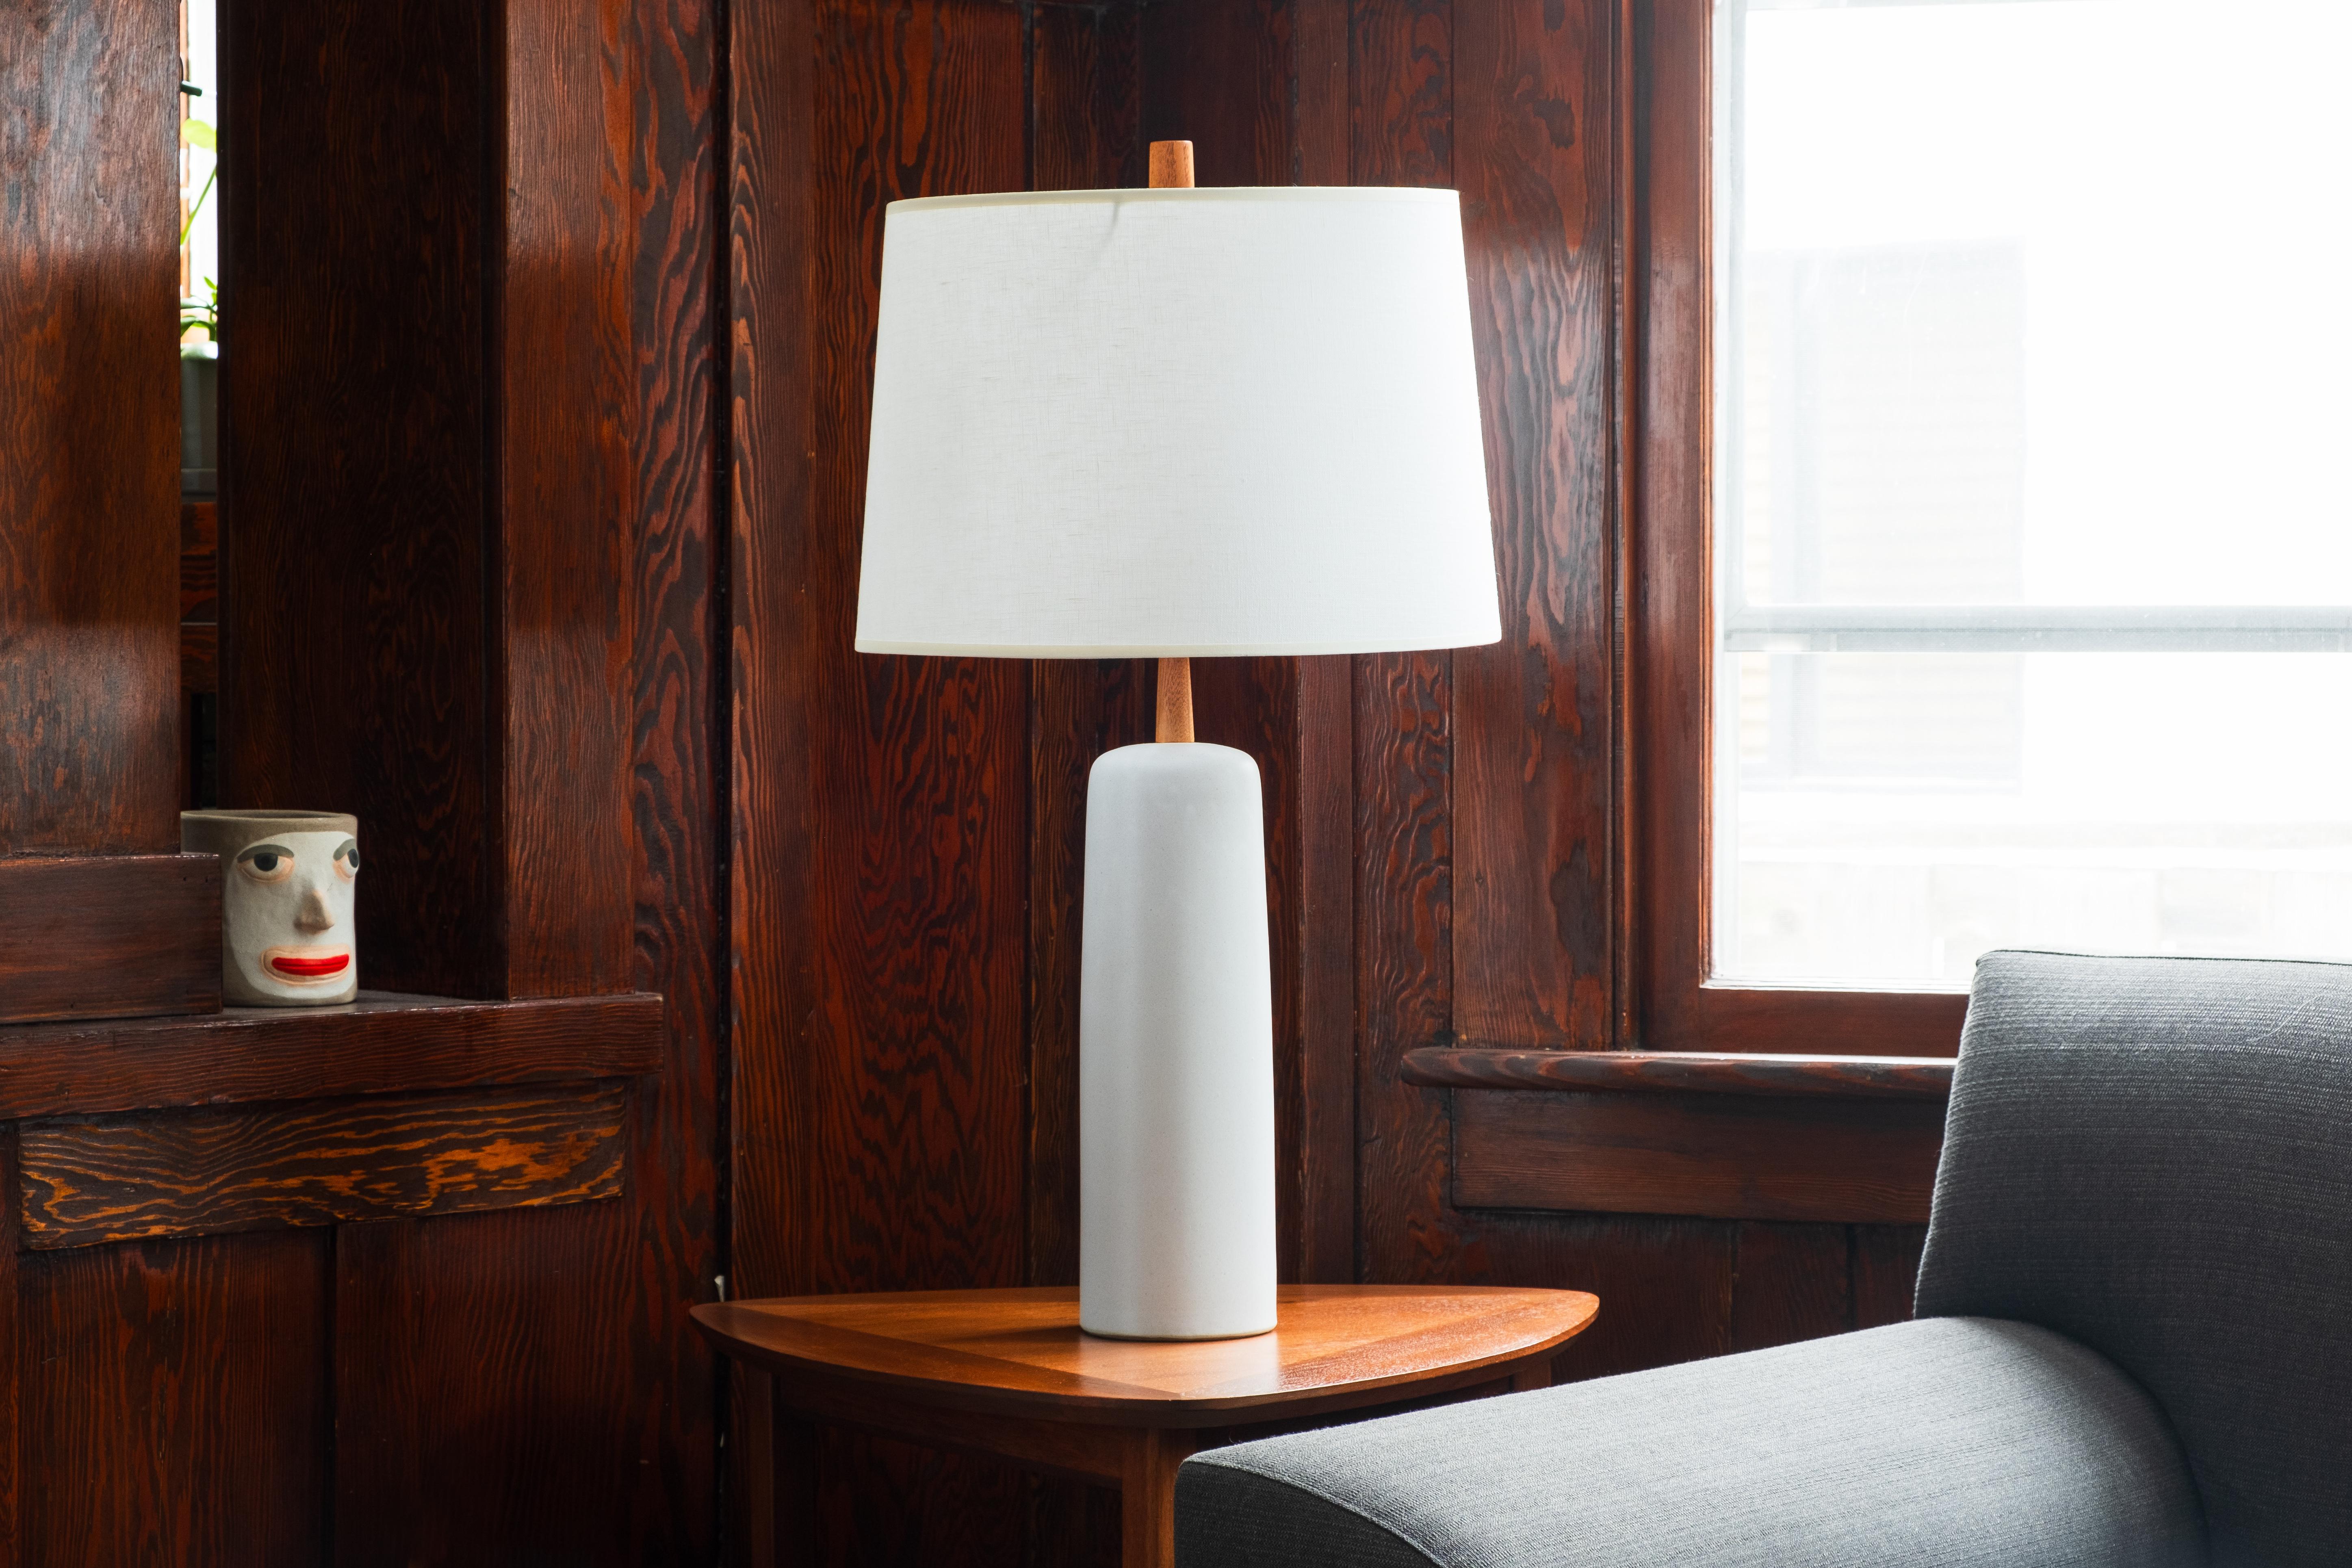 WHAT IS IT?
—
This signed Martz Model 41 lamp comes in a matte white / light gray glaze. The tall ceramic body gives way to a thin, tapered walnut neck and the whole ensemble is capped off with a reproduction Martz walnut finial.

This model of lamp